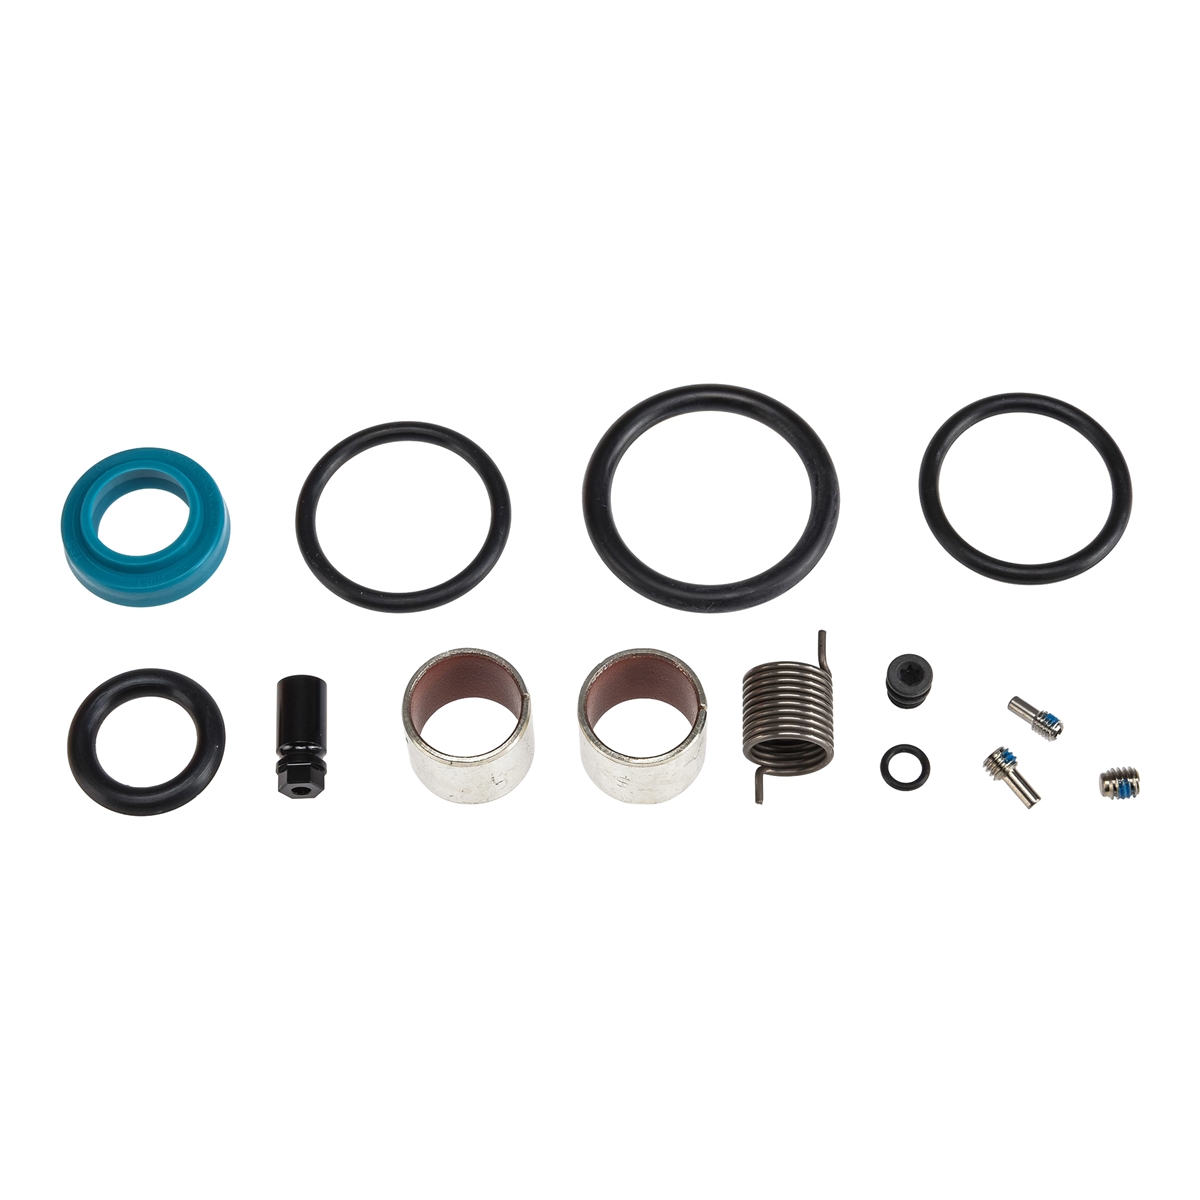 Service Kit 200 hours / 1 year for Super Deluxe Coil / Coil Remote A1 - A2 (2018-2020) rear shox